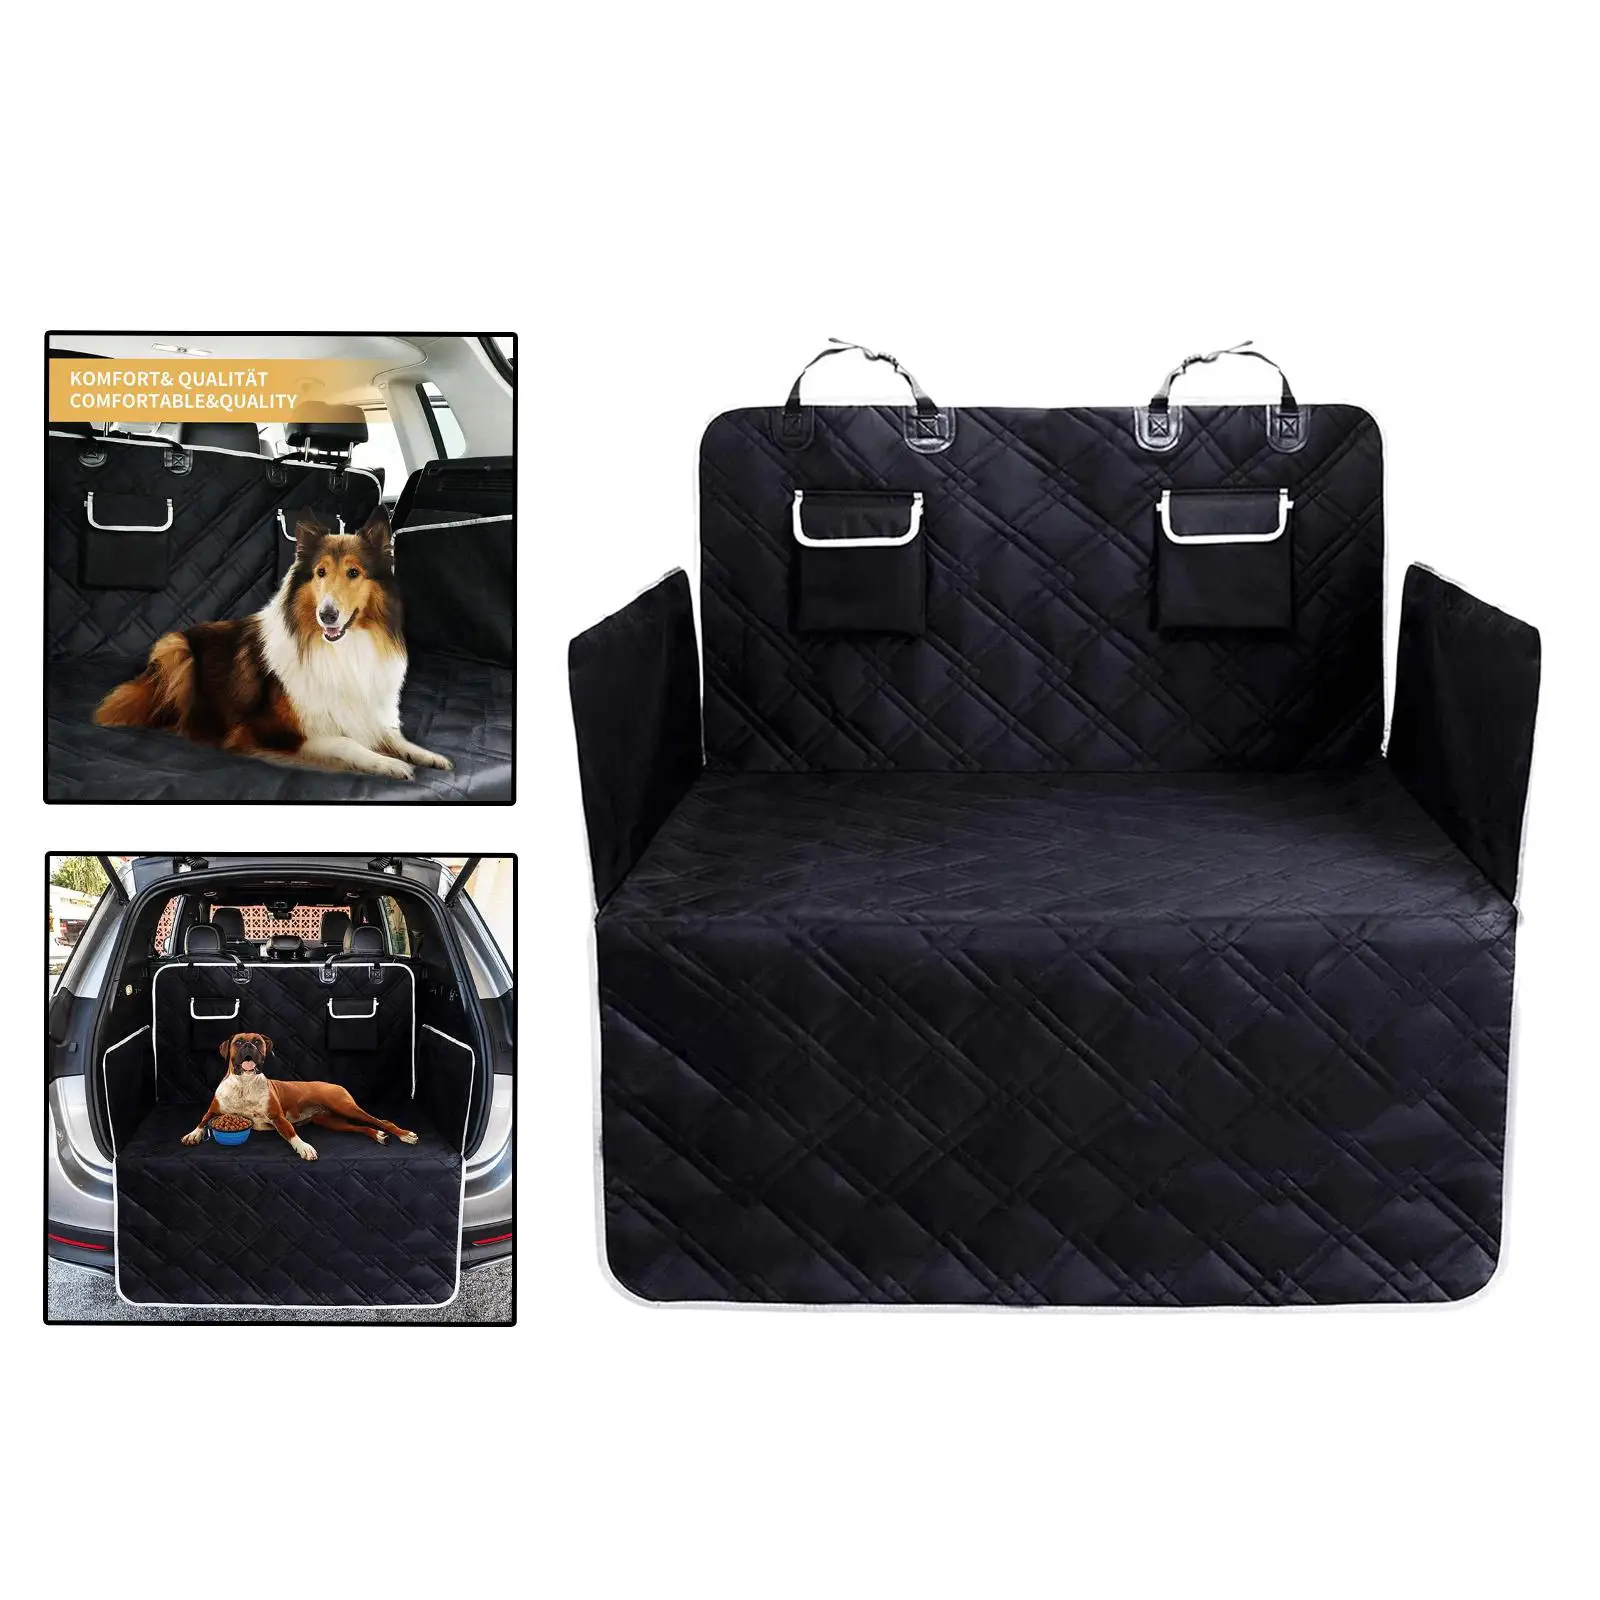 Dog Back Seat Cover Waterproof Scratchproof Nonslip Hammock for Backseat Against and Pet Seat Covers & SUVs